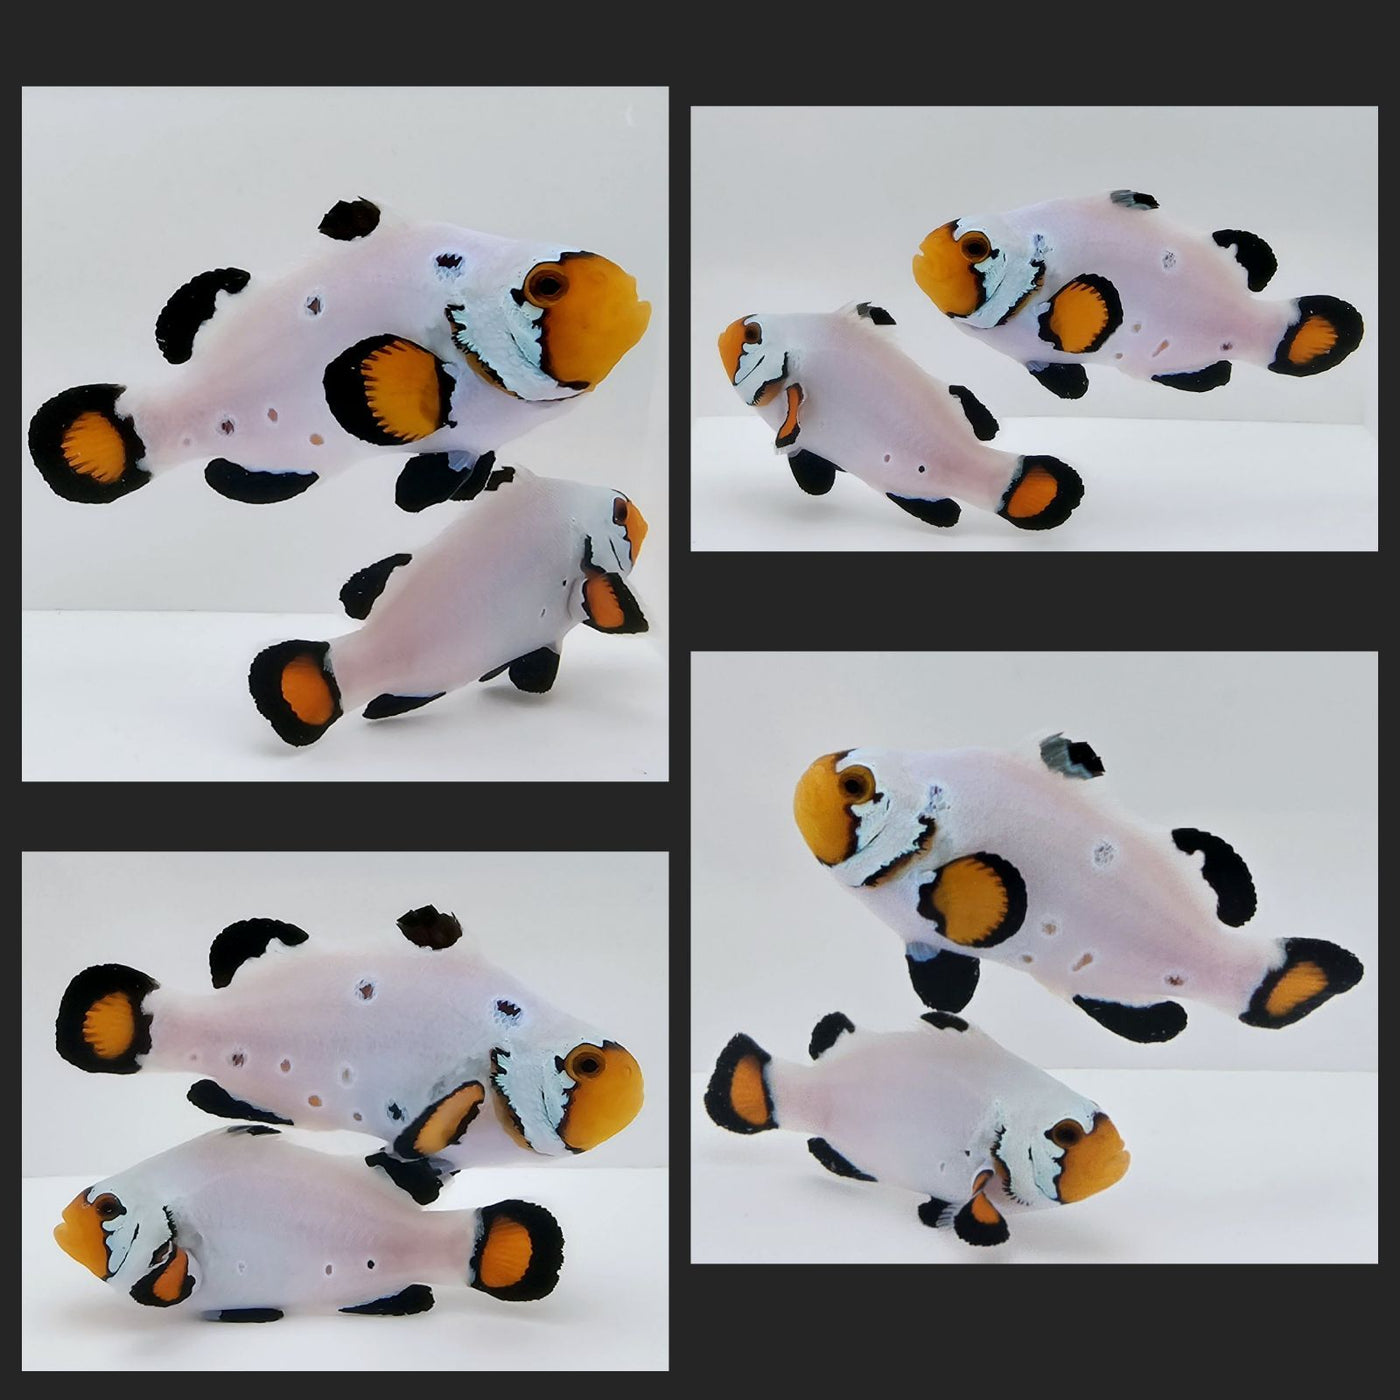 Clownfish Bonded Pair Frostbite Chilled